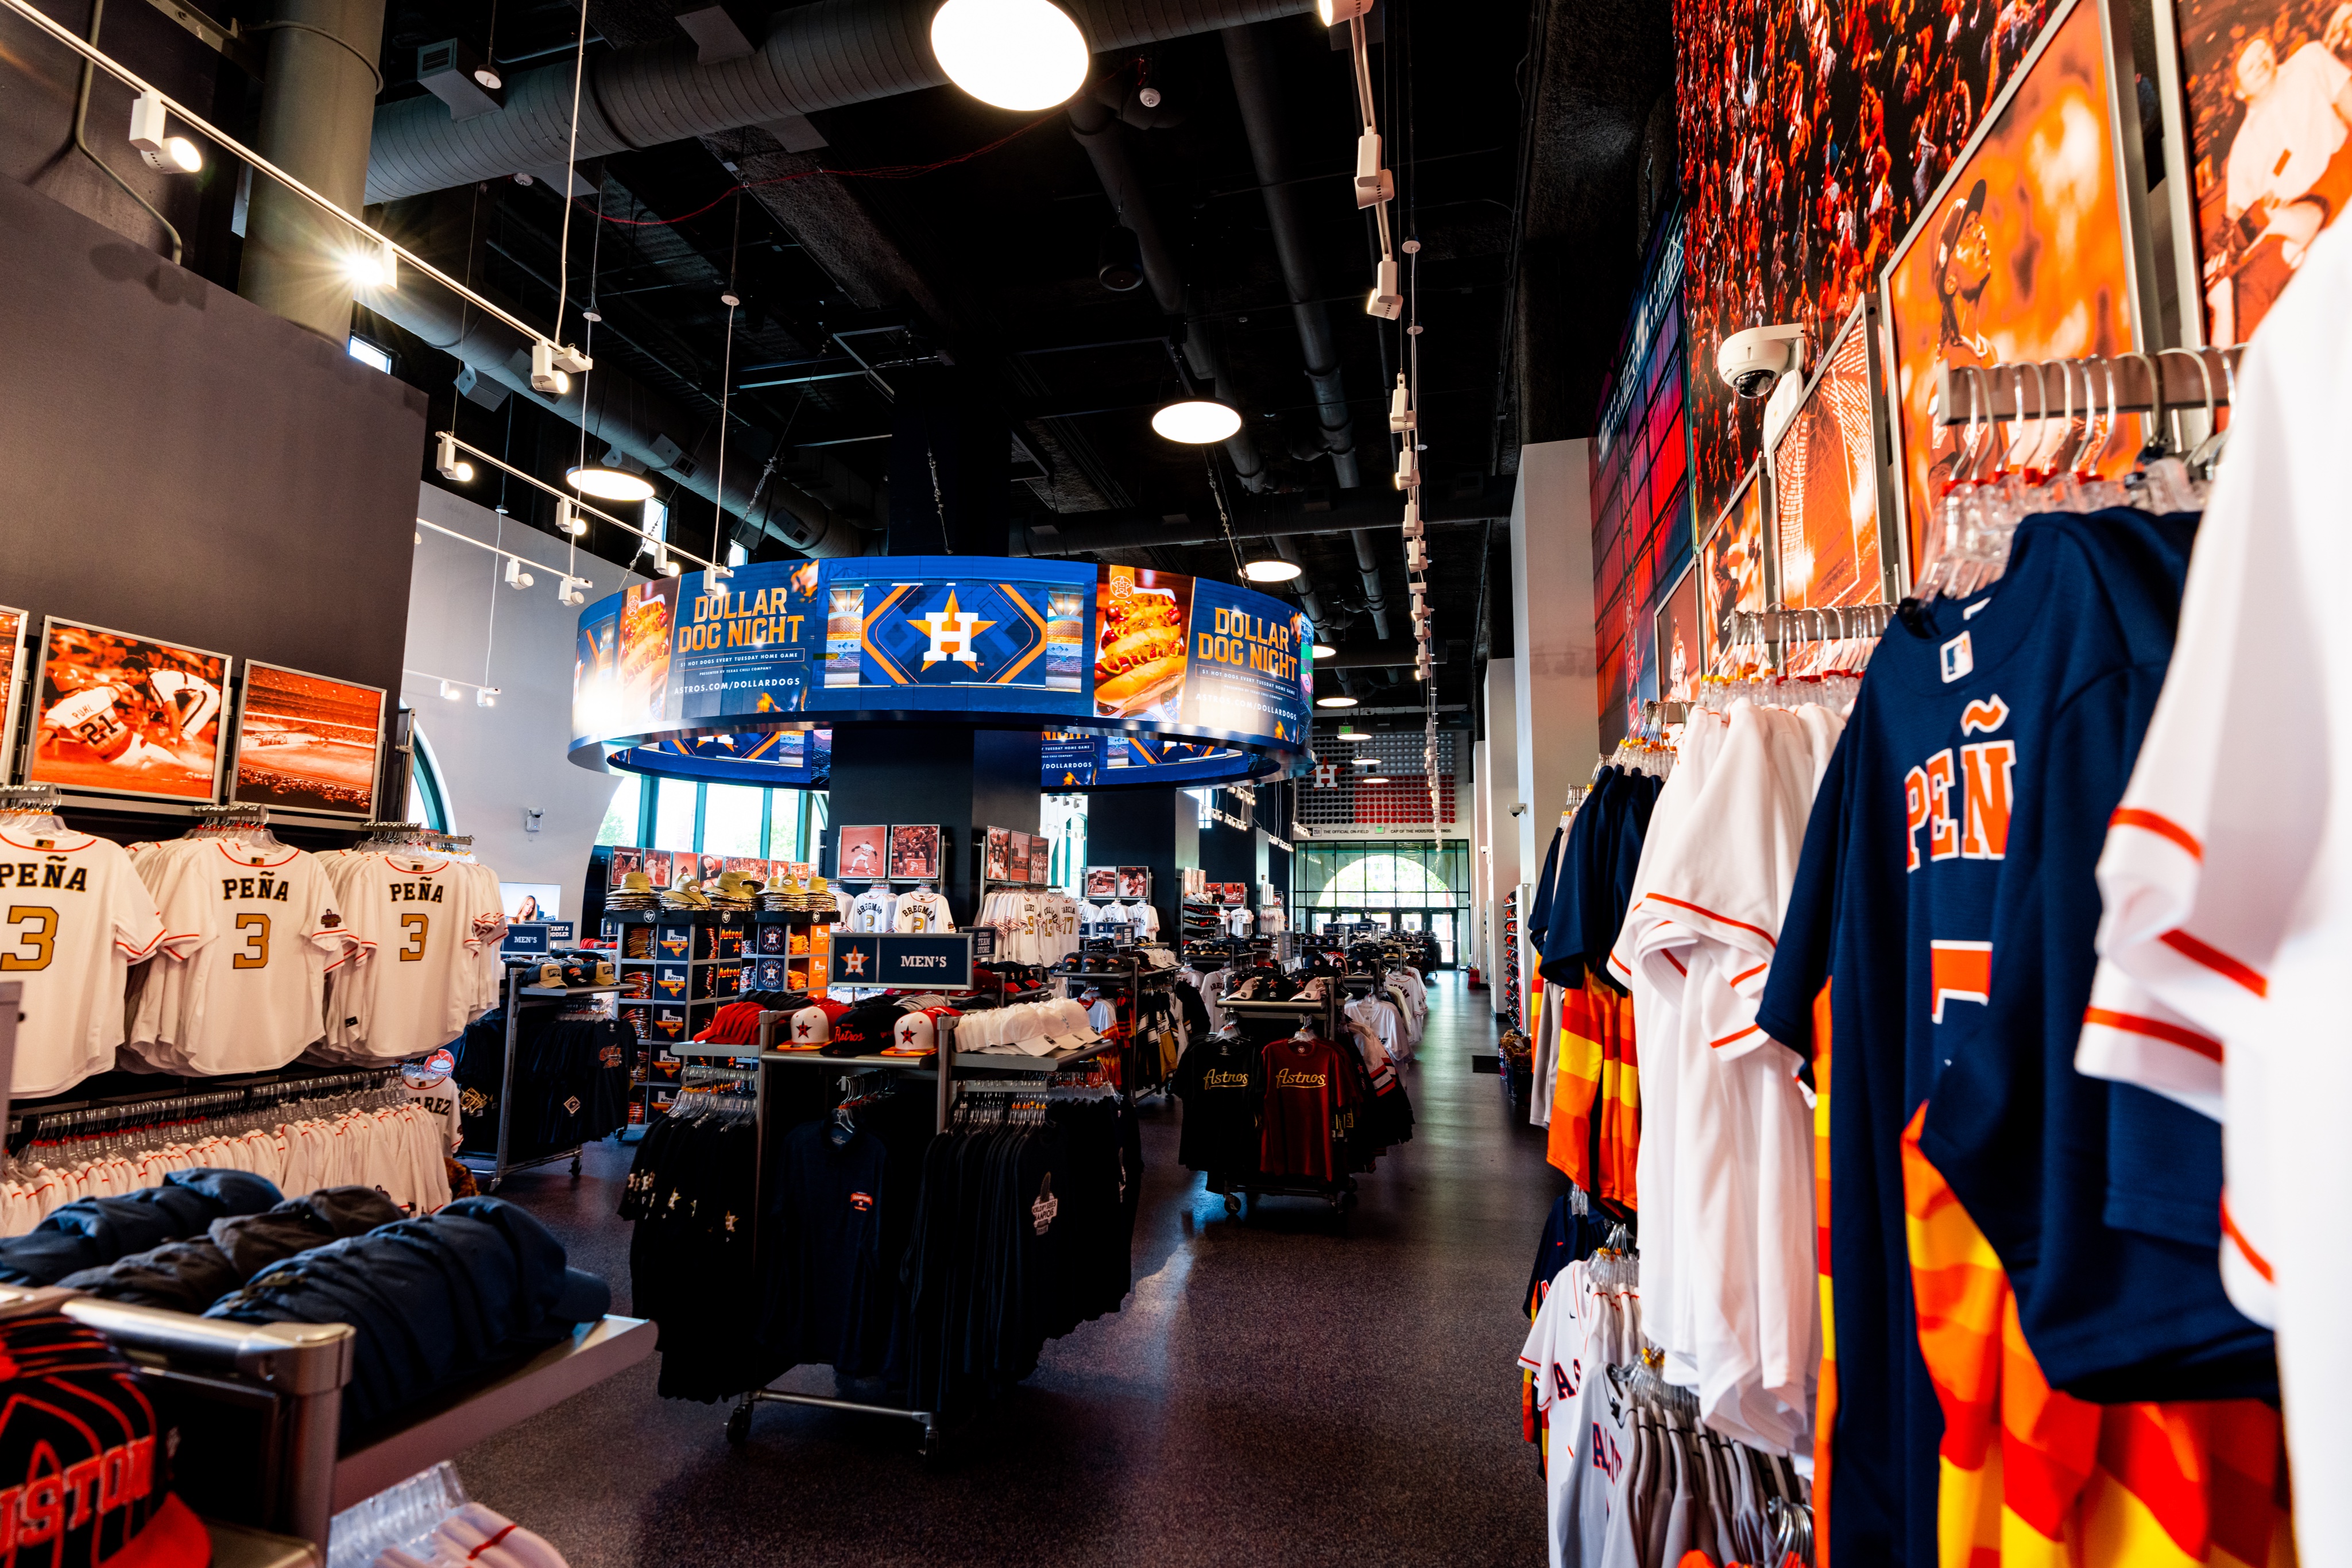 Houston Astros on X: Effective today, the Center Field Team Store is now  the main team store and will be open prior to games and non game days. The  Union Station Team